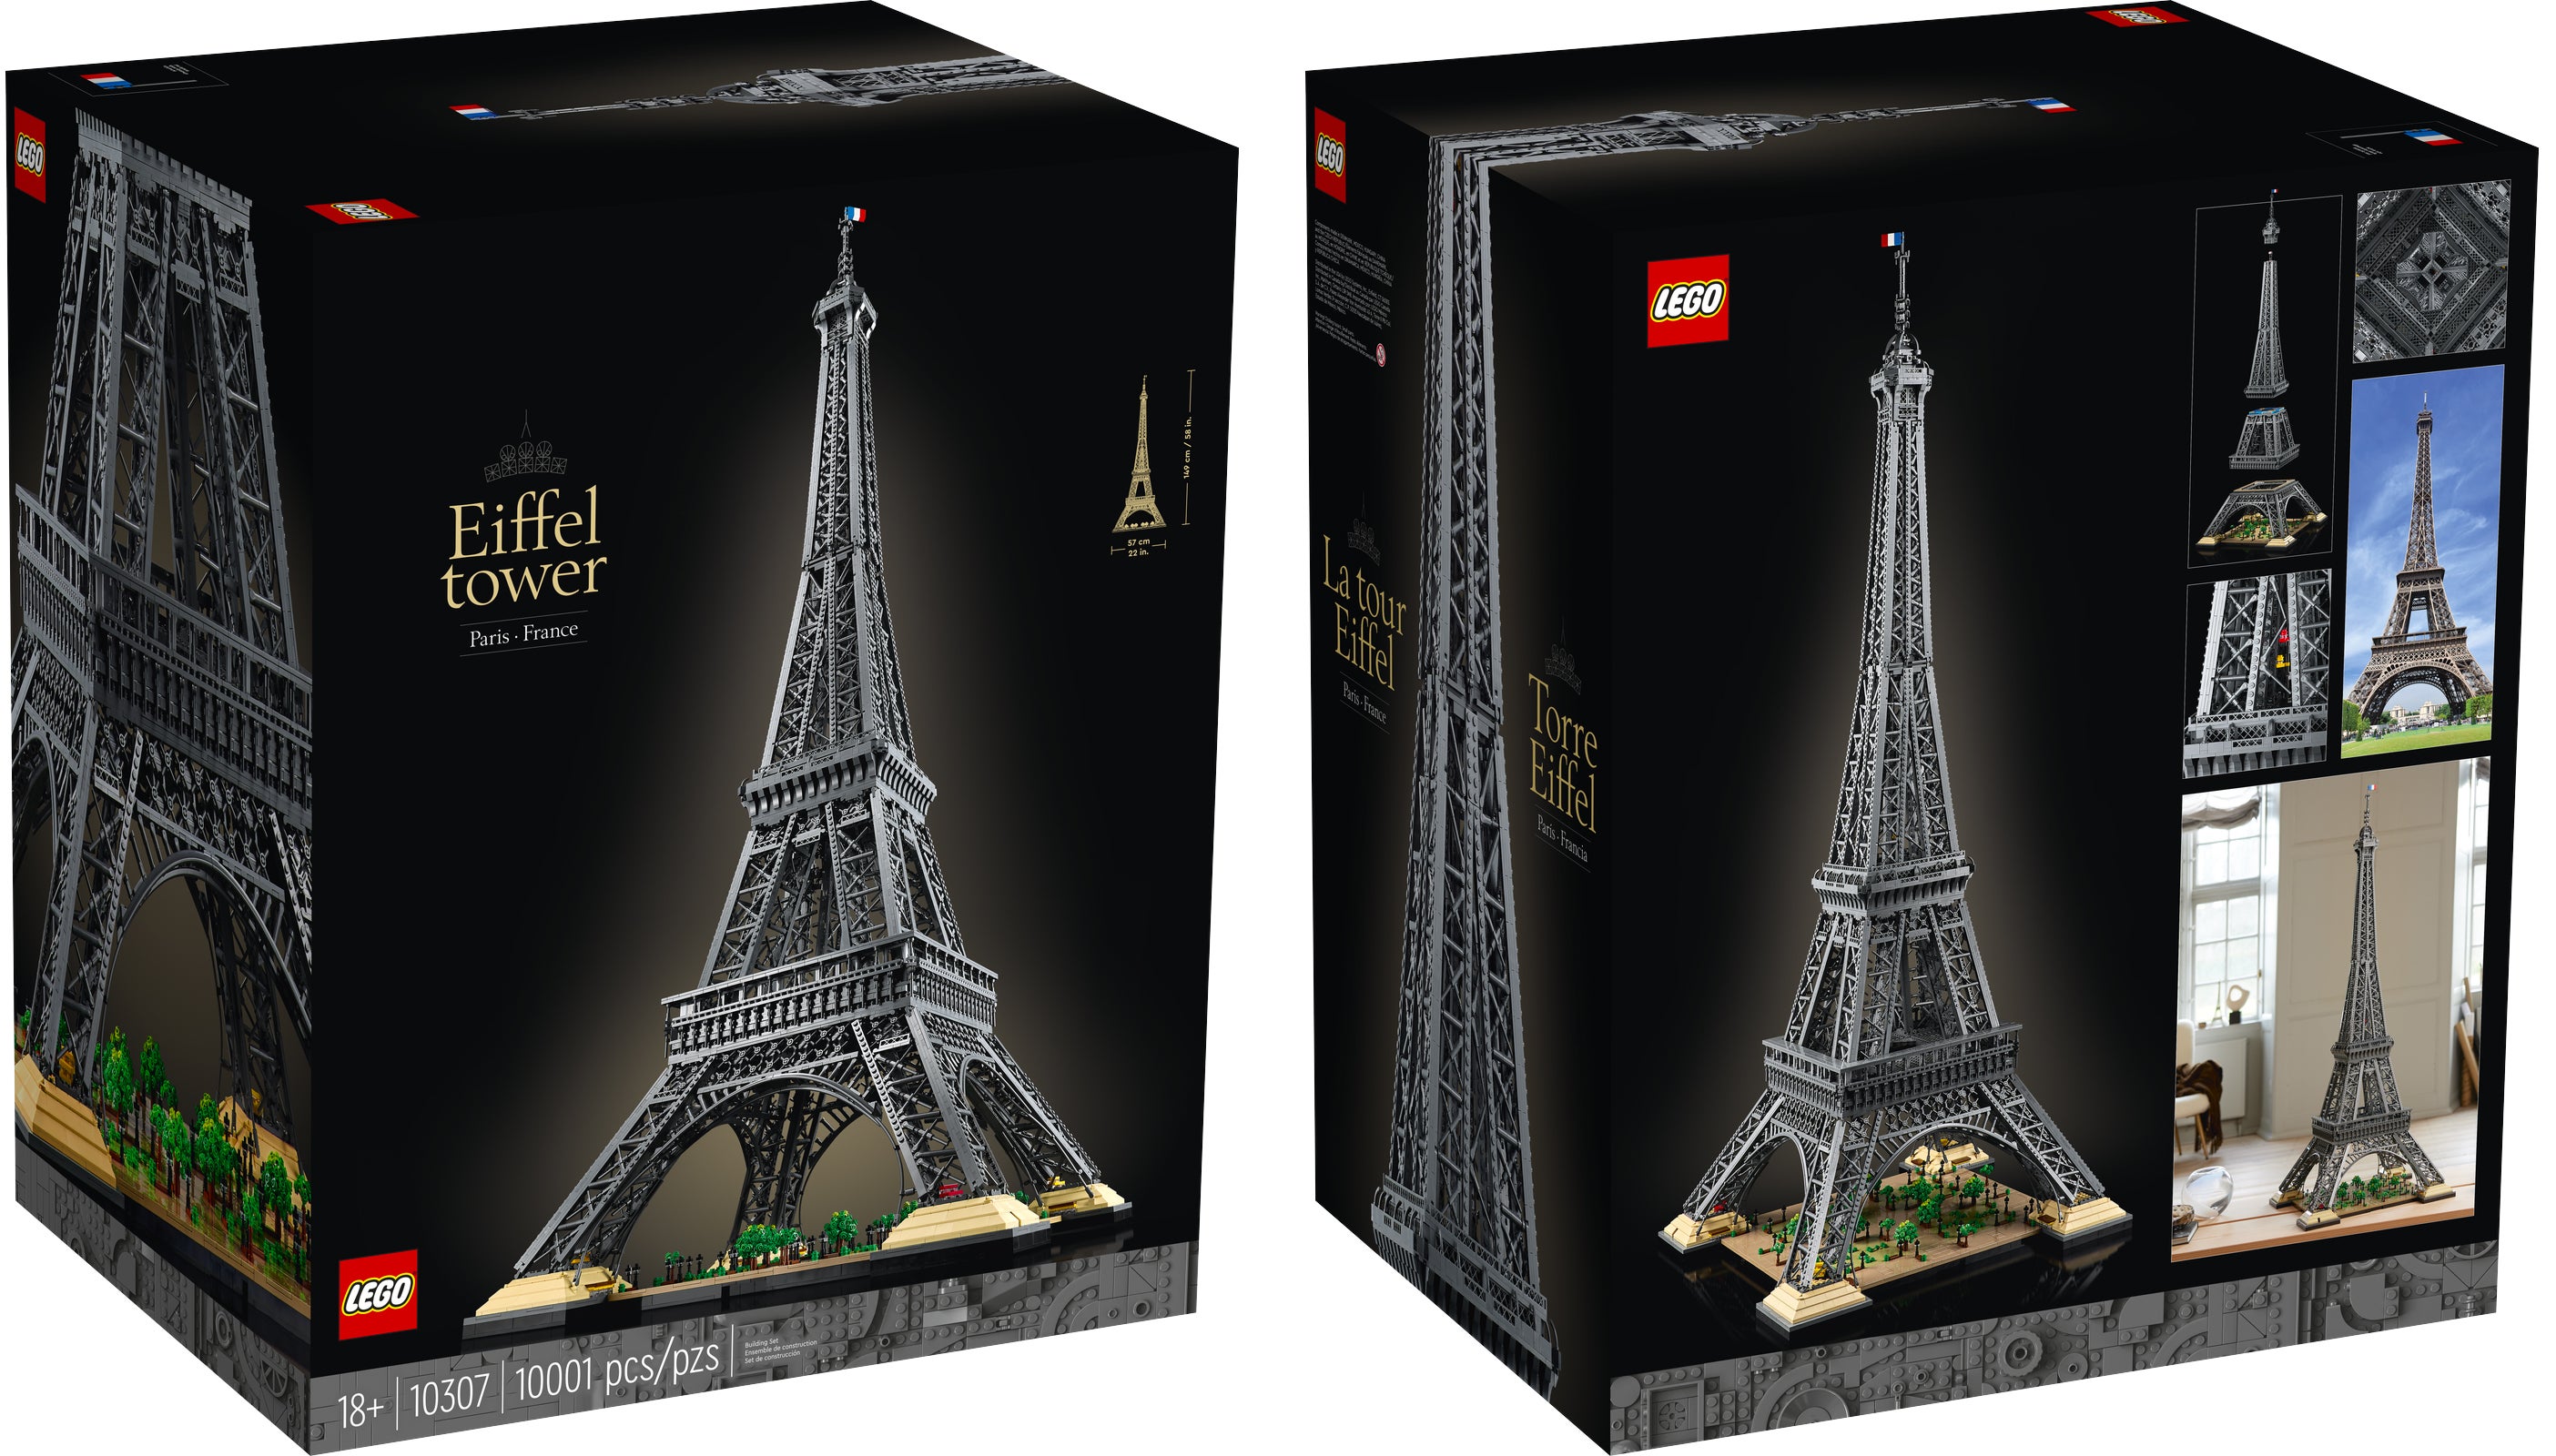 The Massive Five-Foot Tall Eiffel Tower Is the Tallest LEGO Set of All Time